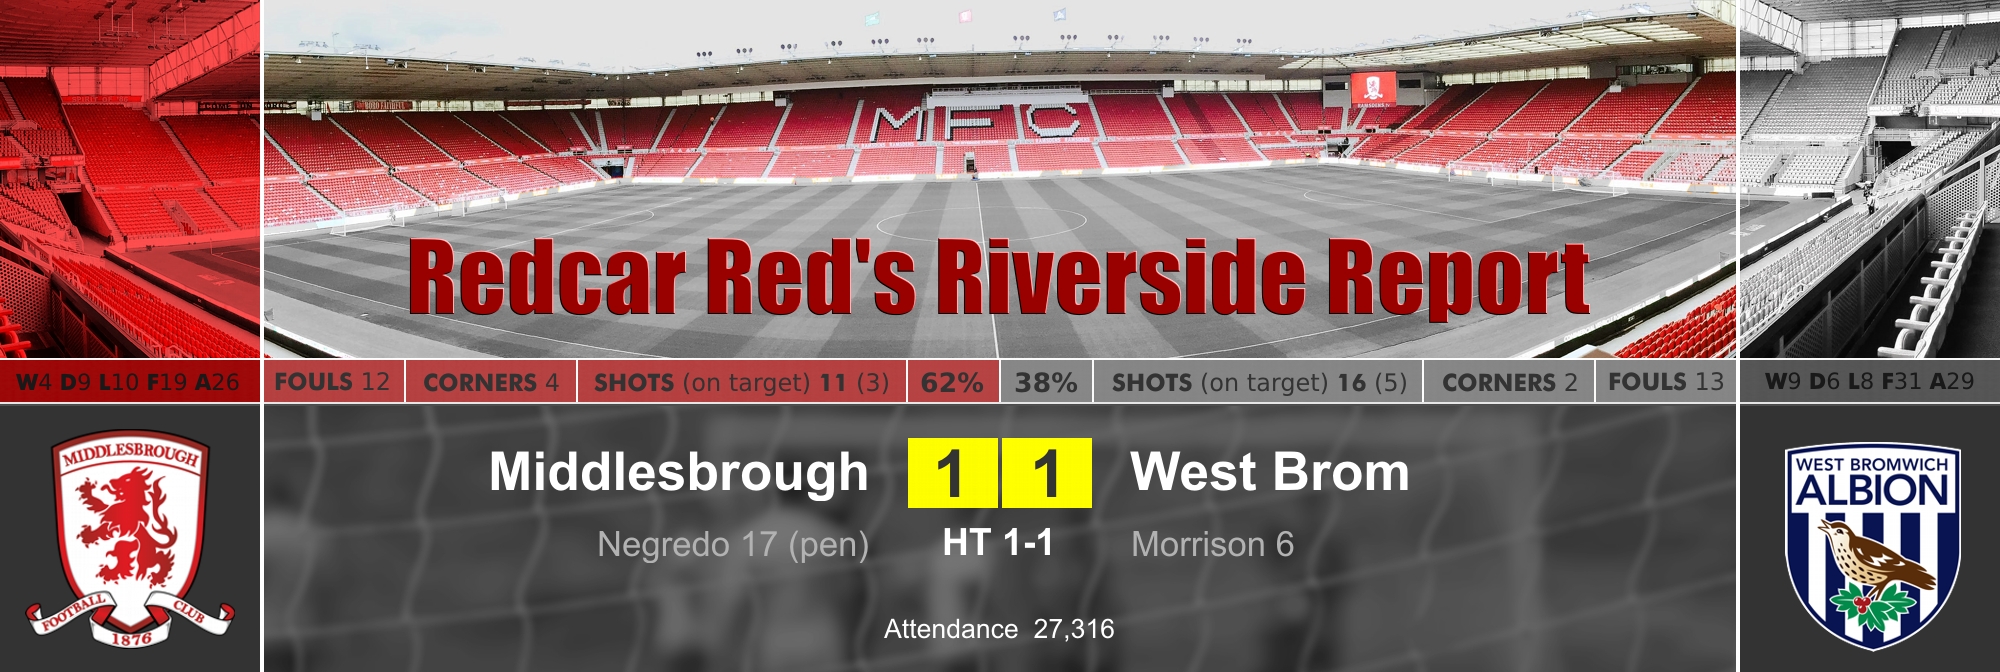 redcar-red-report-west-brom-stats-3